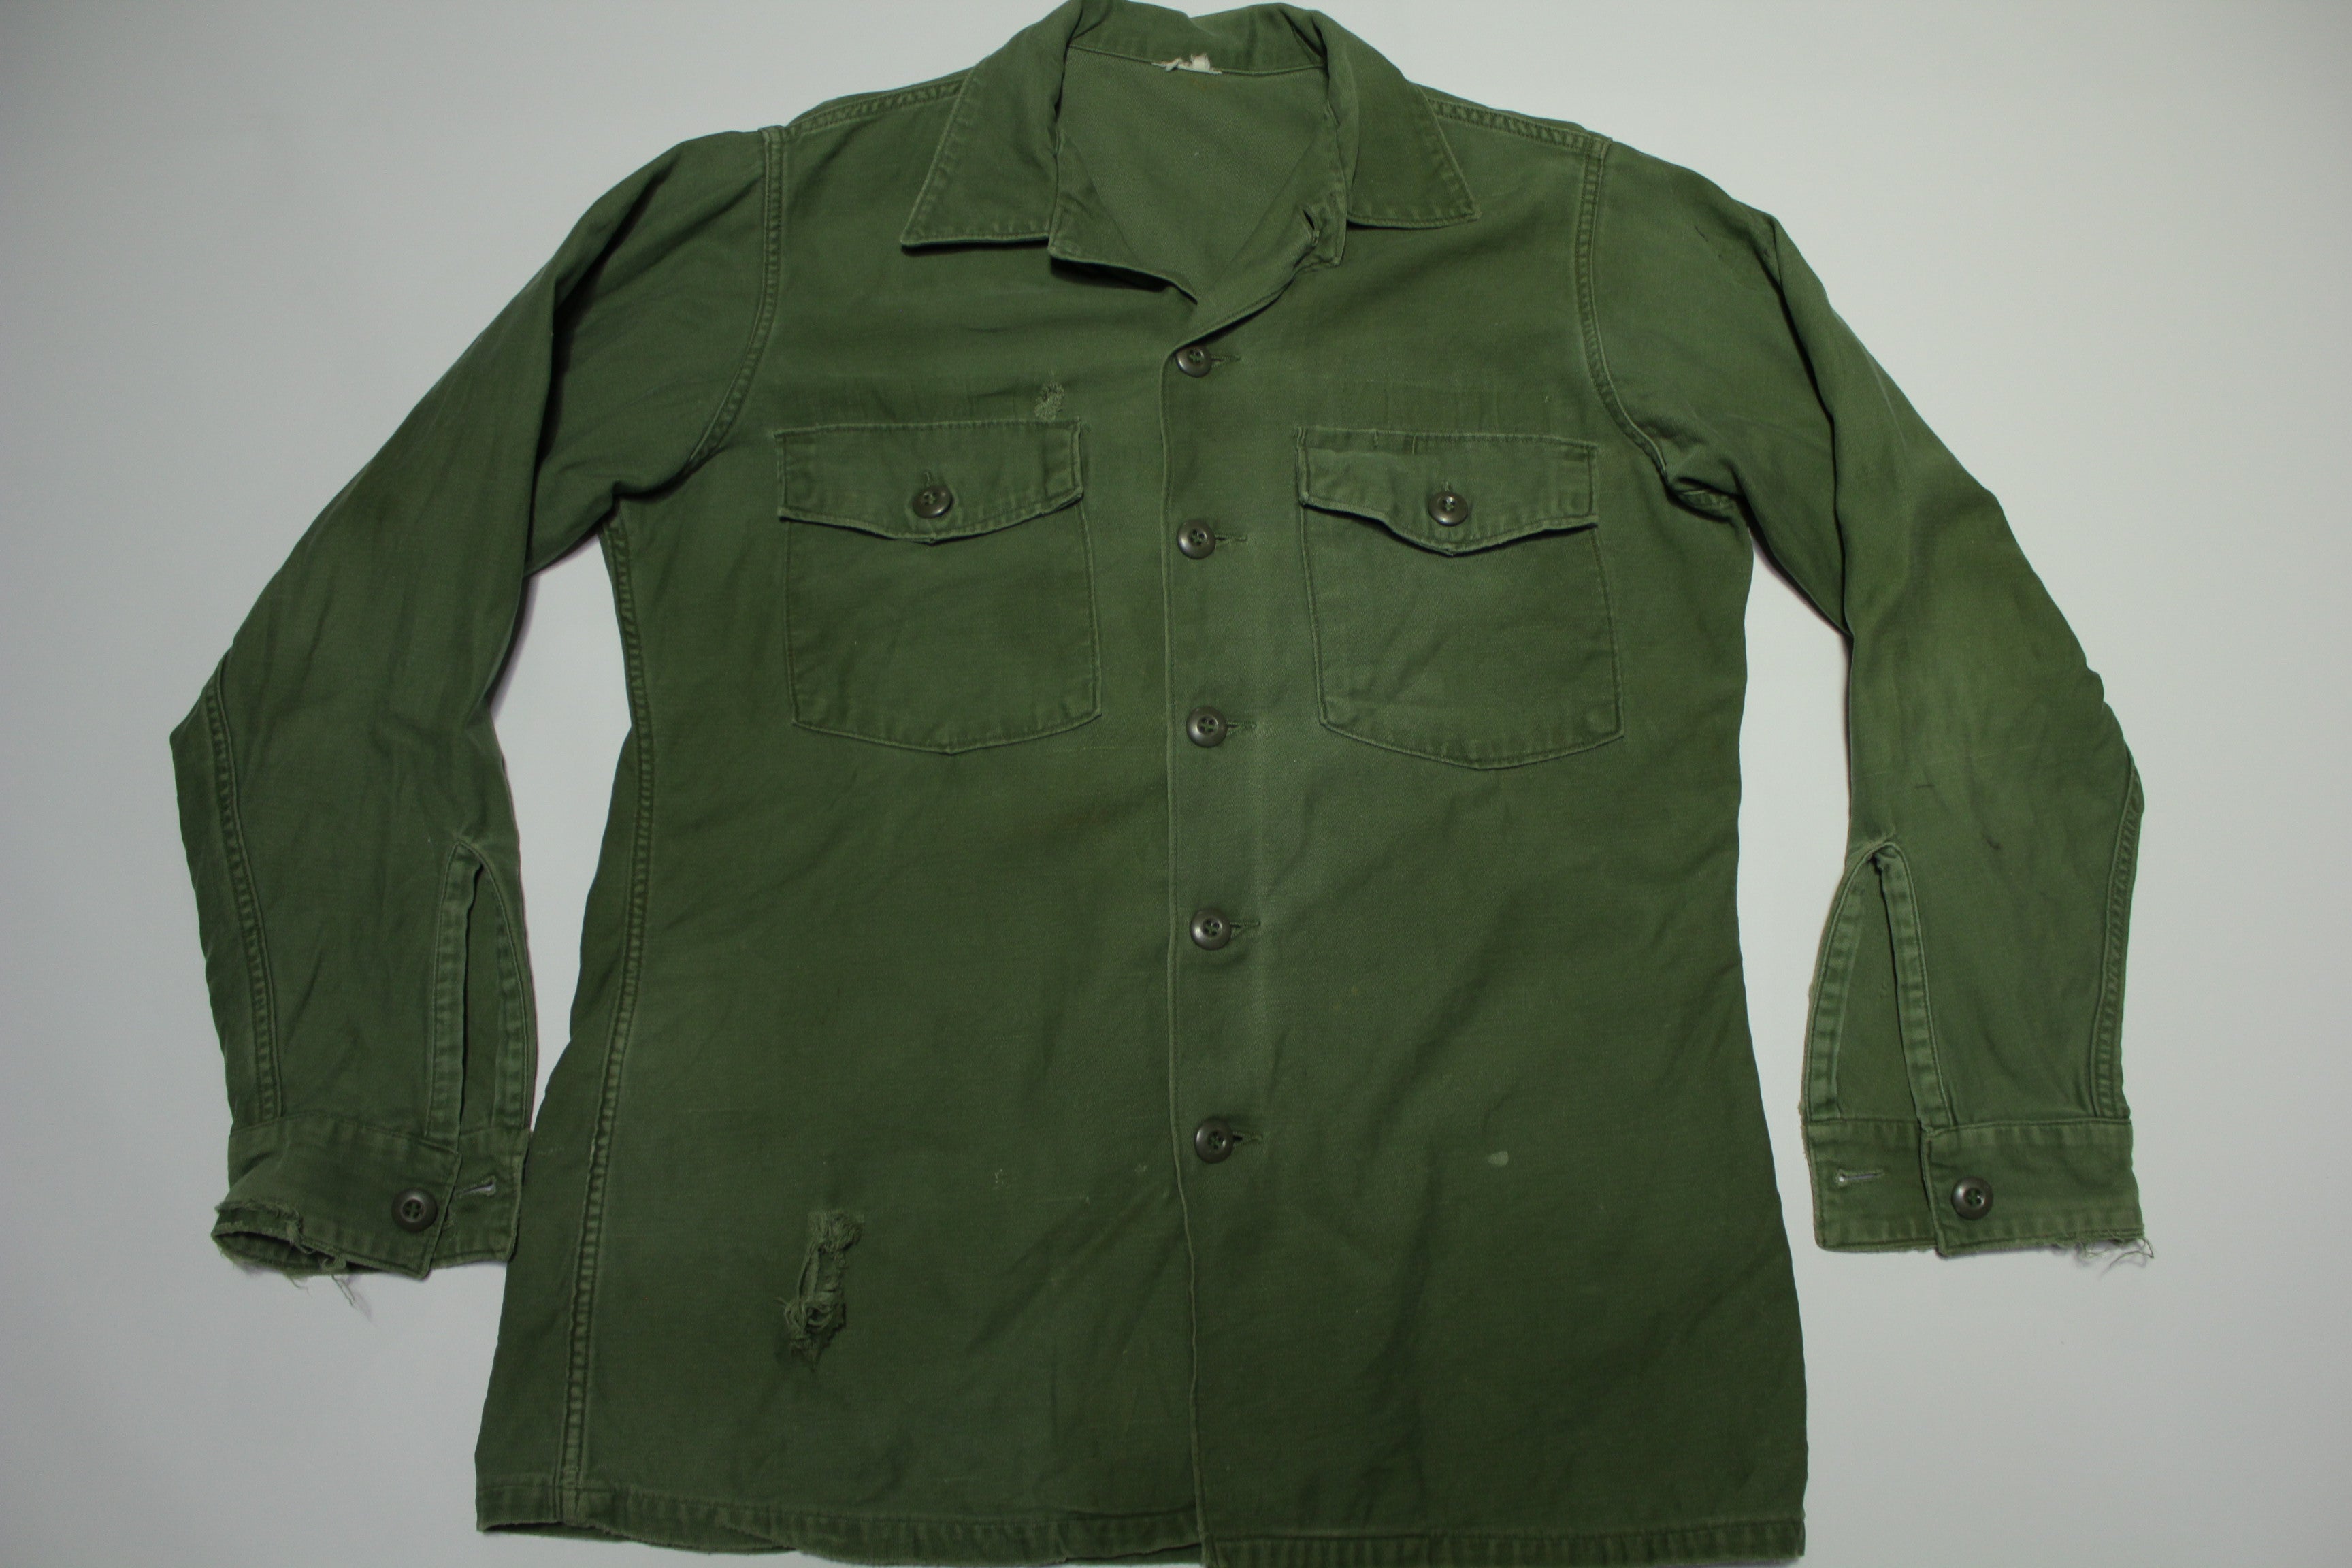 Shirt Utility Sateen OG-107 DLA100 Vintage 60s Military Army Issue